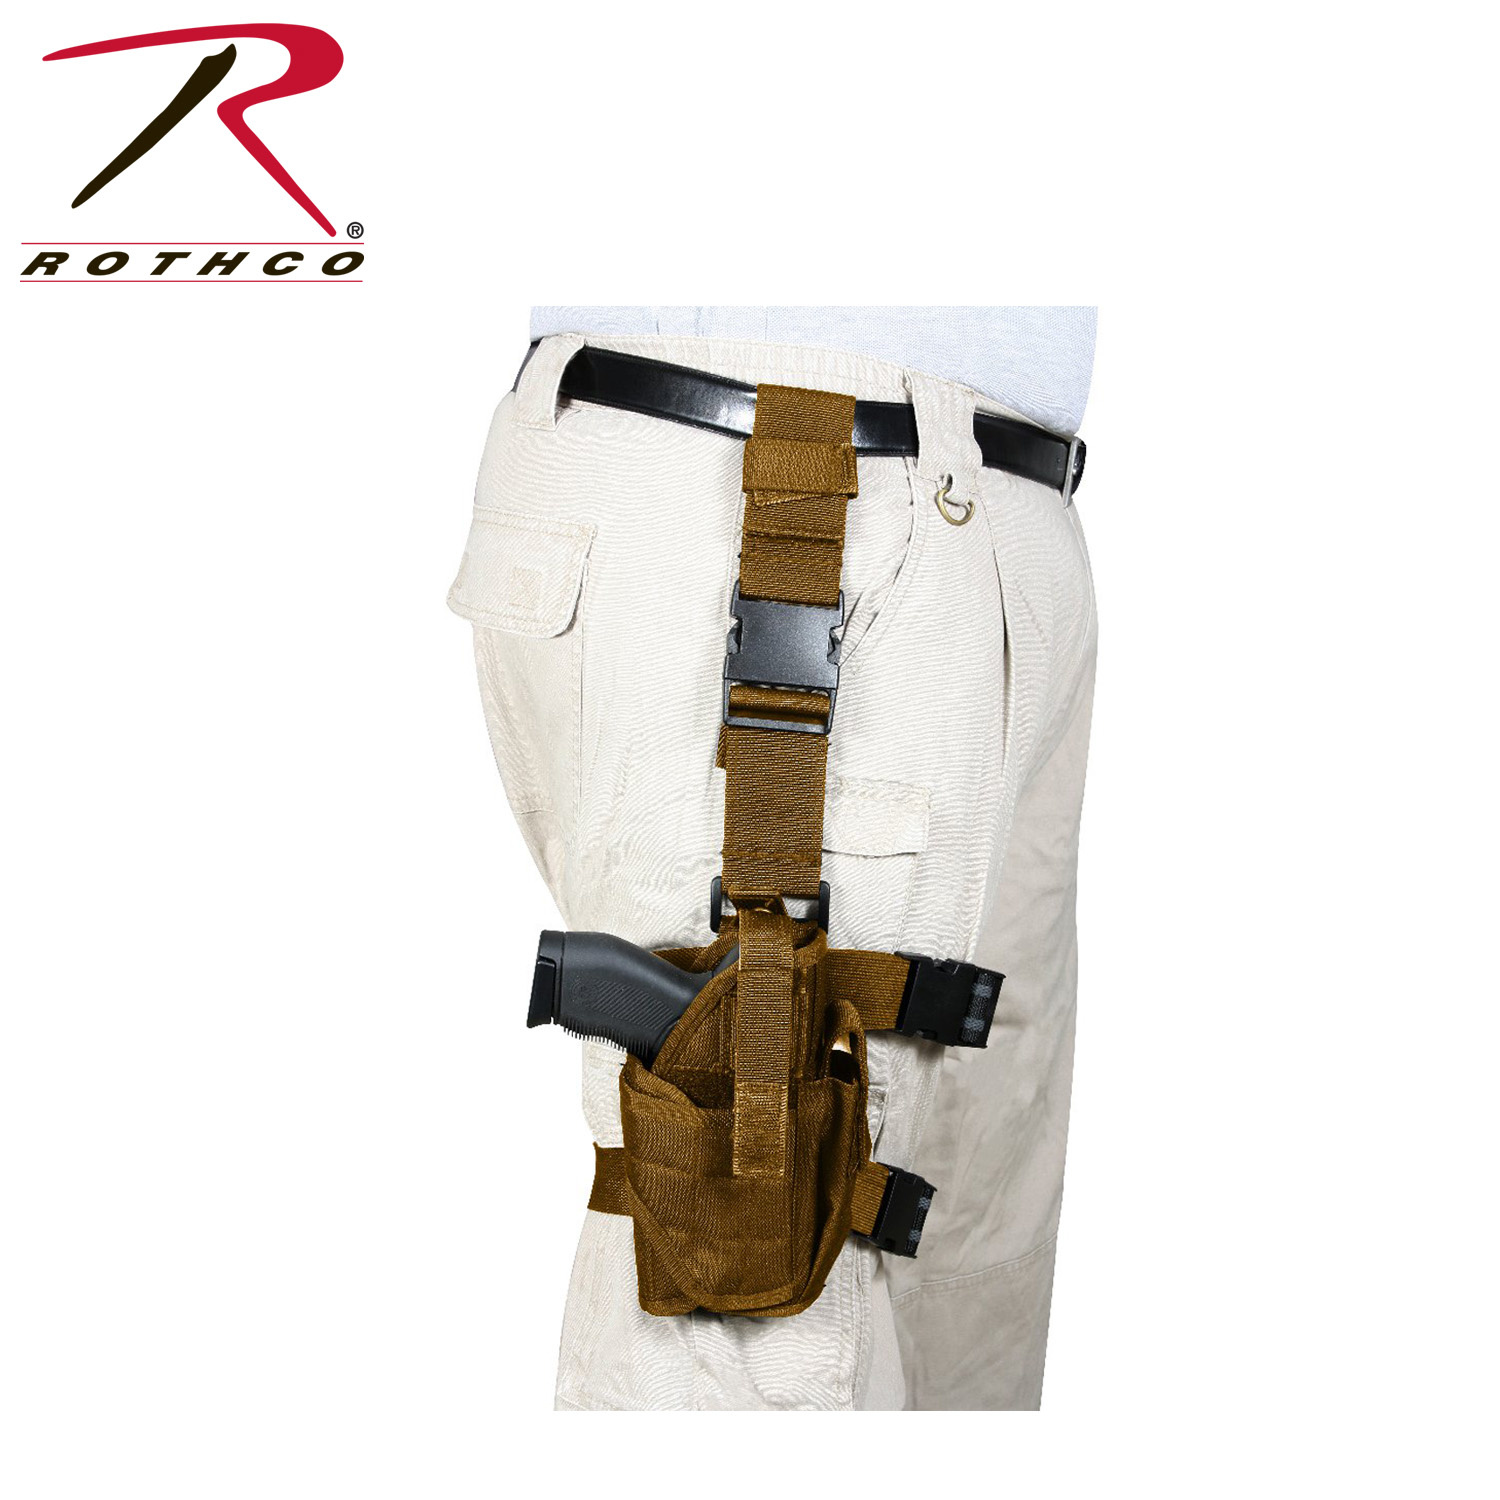 Rothco Deluxe Drop Leg Holster - Cache Tactical Supply